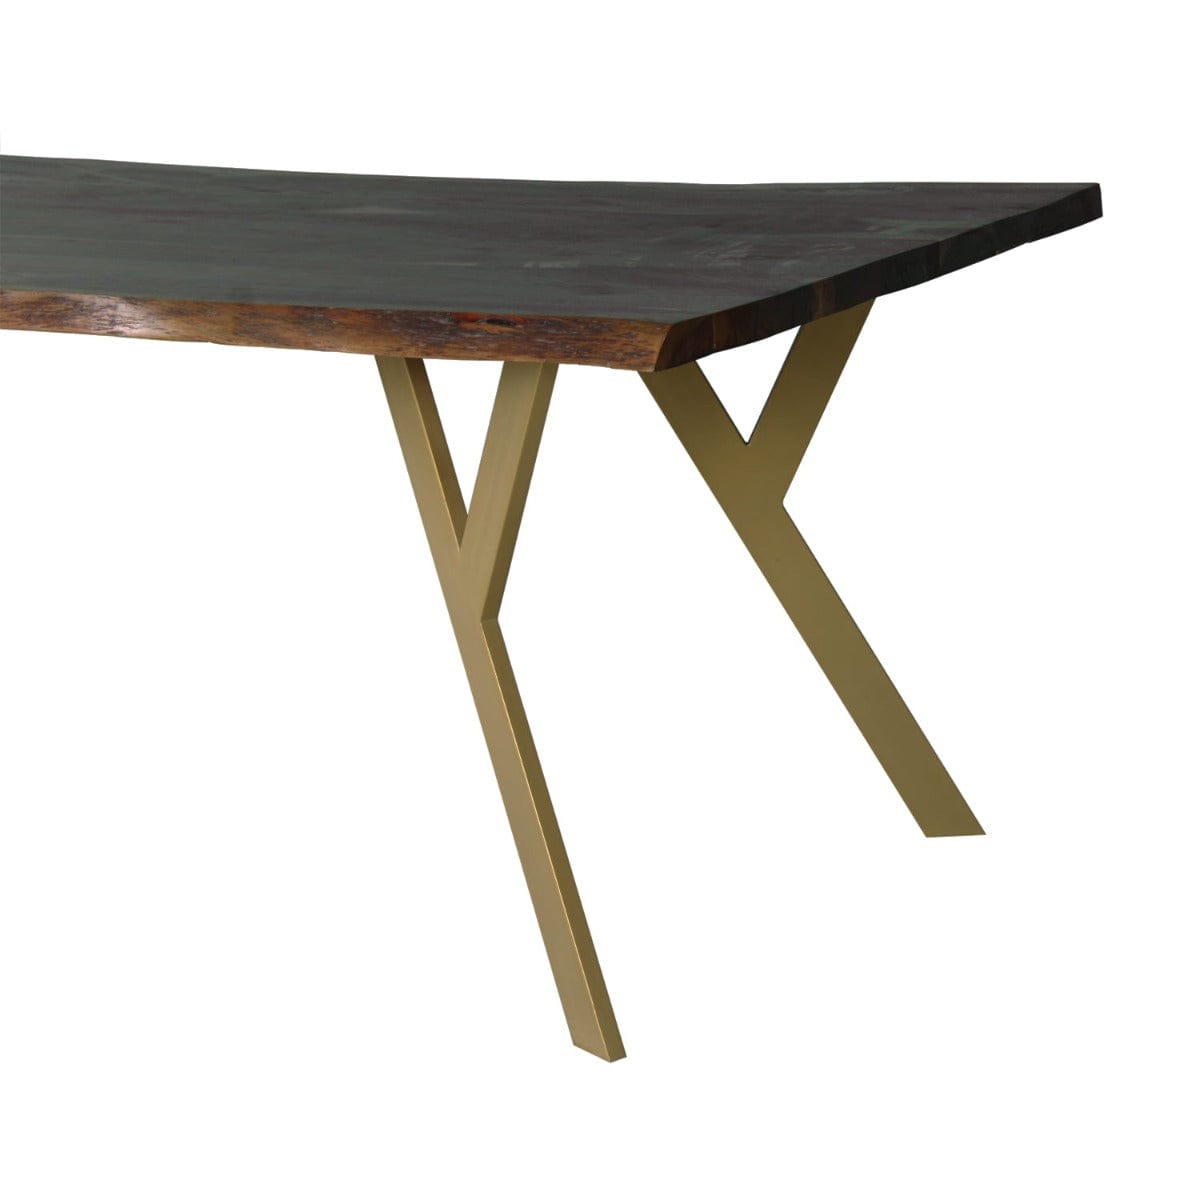 Kir 6 Seater Wooden Dining Table In Gold Finish